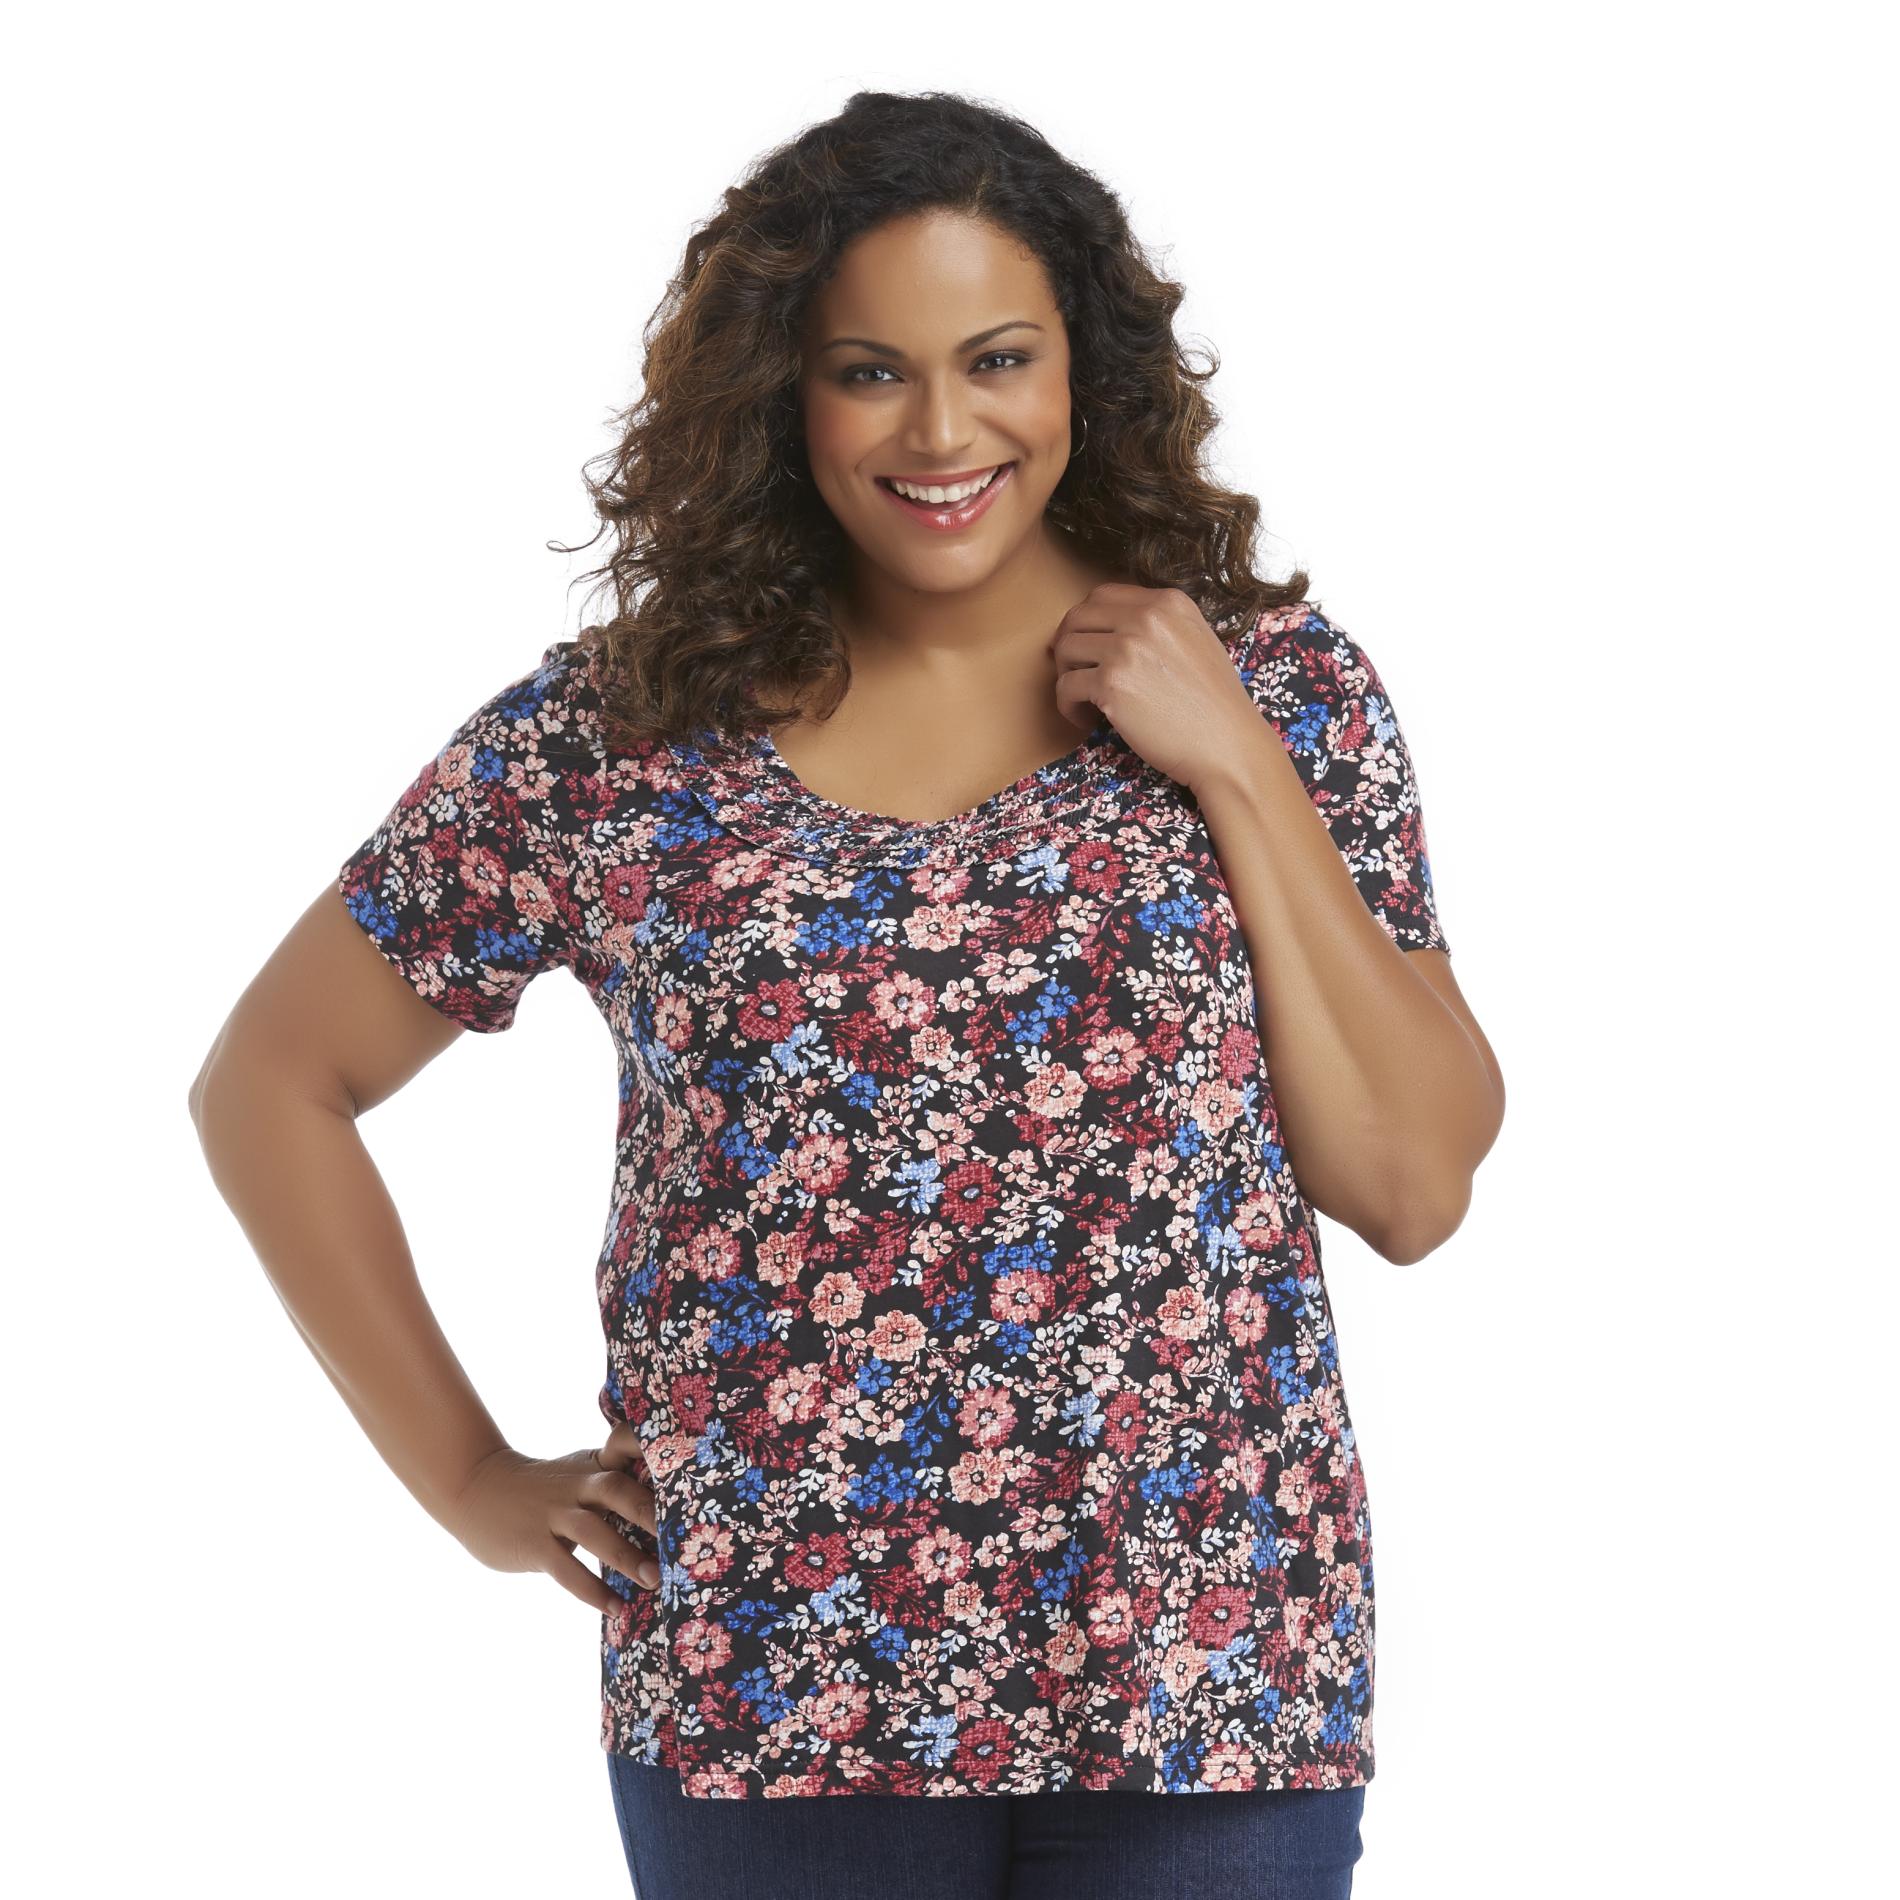 Basic Editions Women's Plus Ruffled Crew Neck Top - Floral